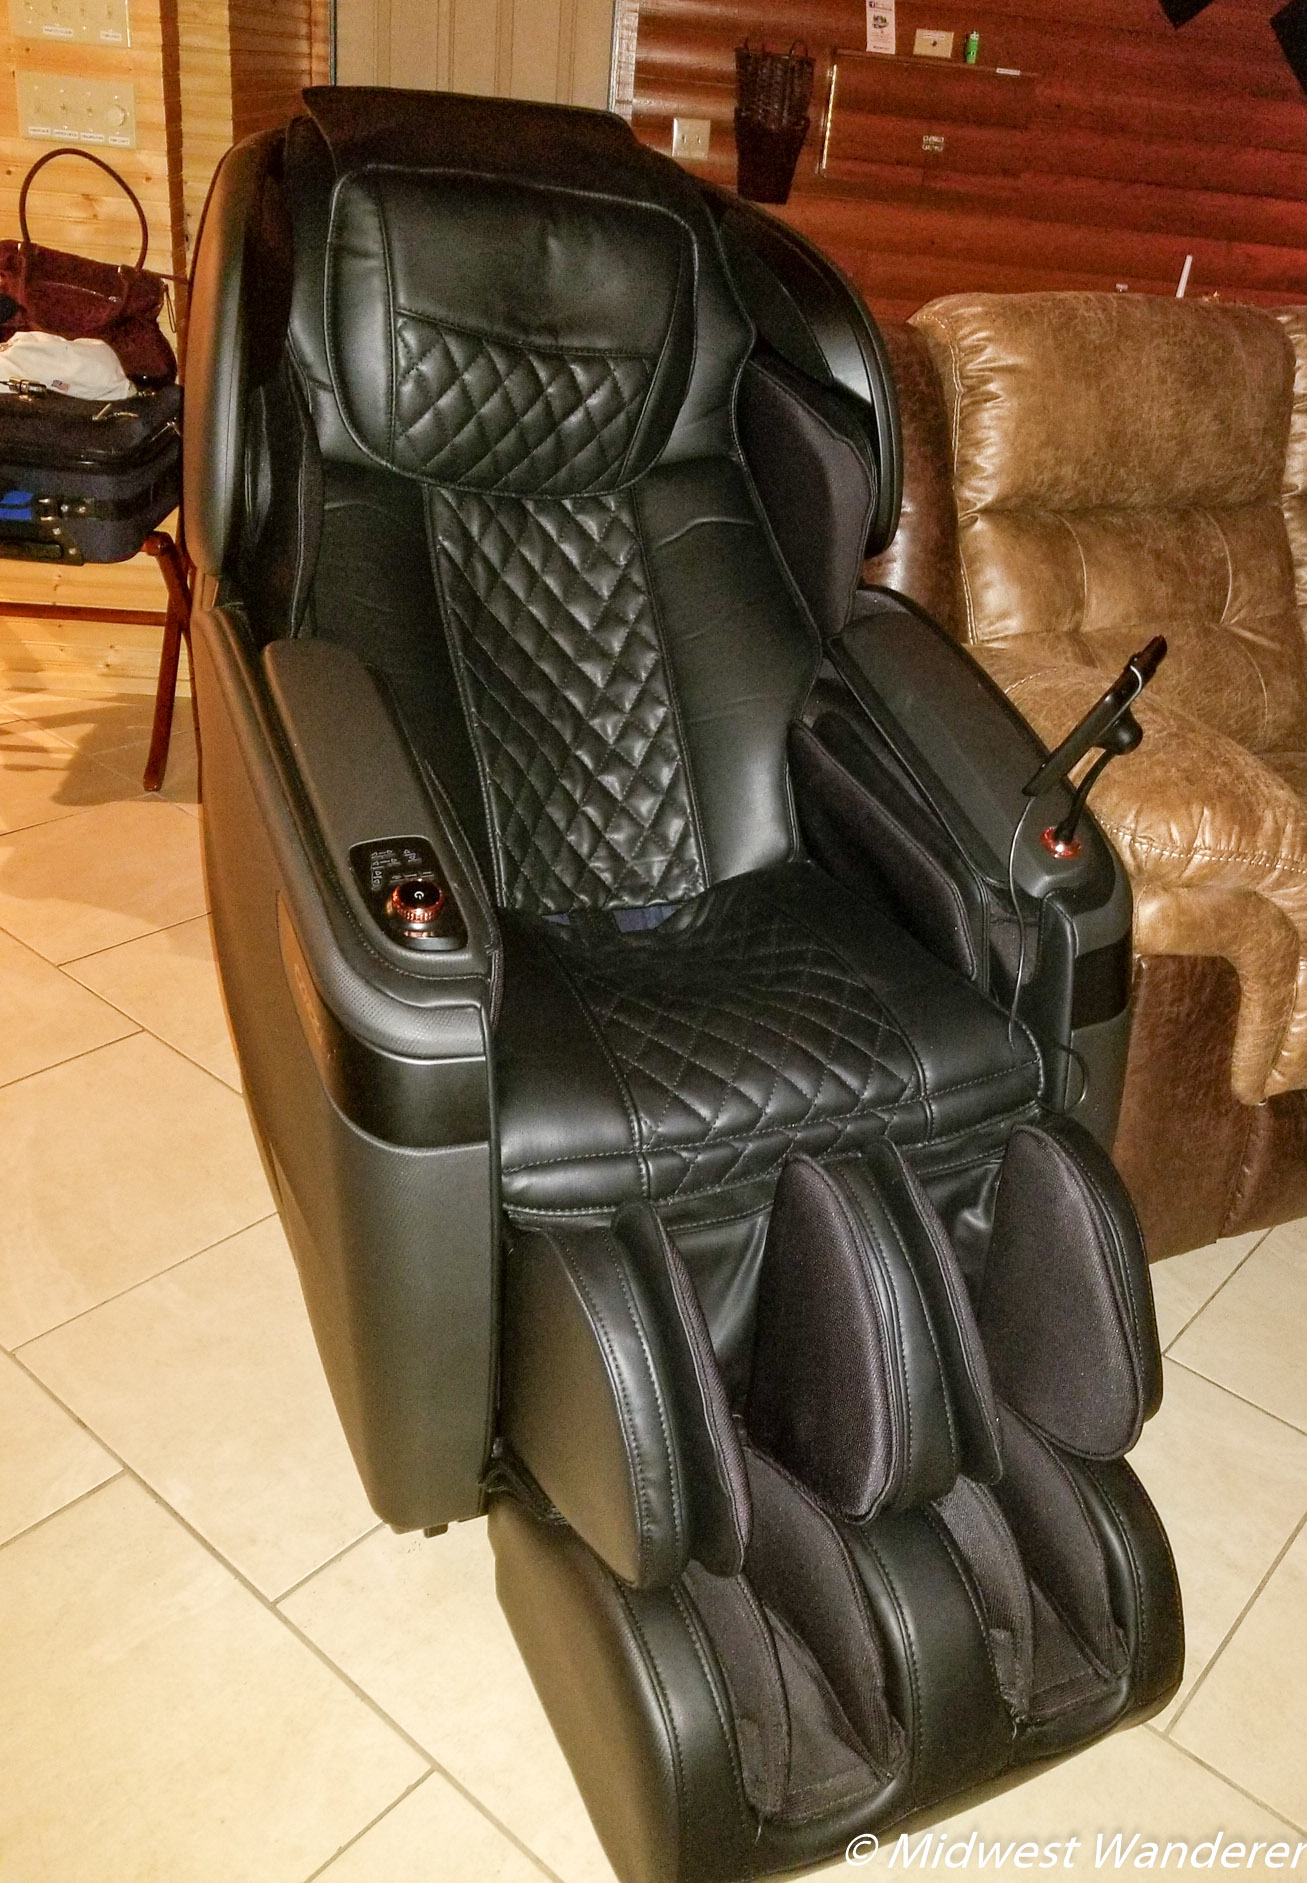 Serenity Springs - massage chair